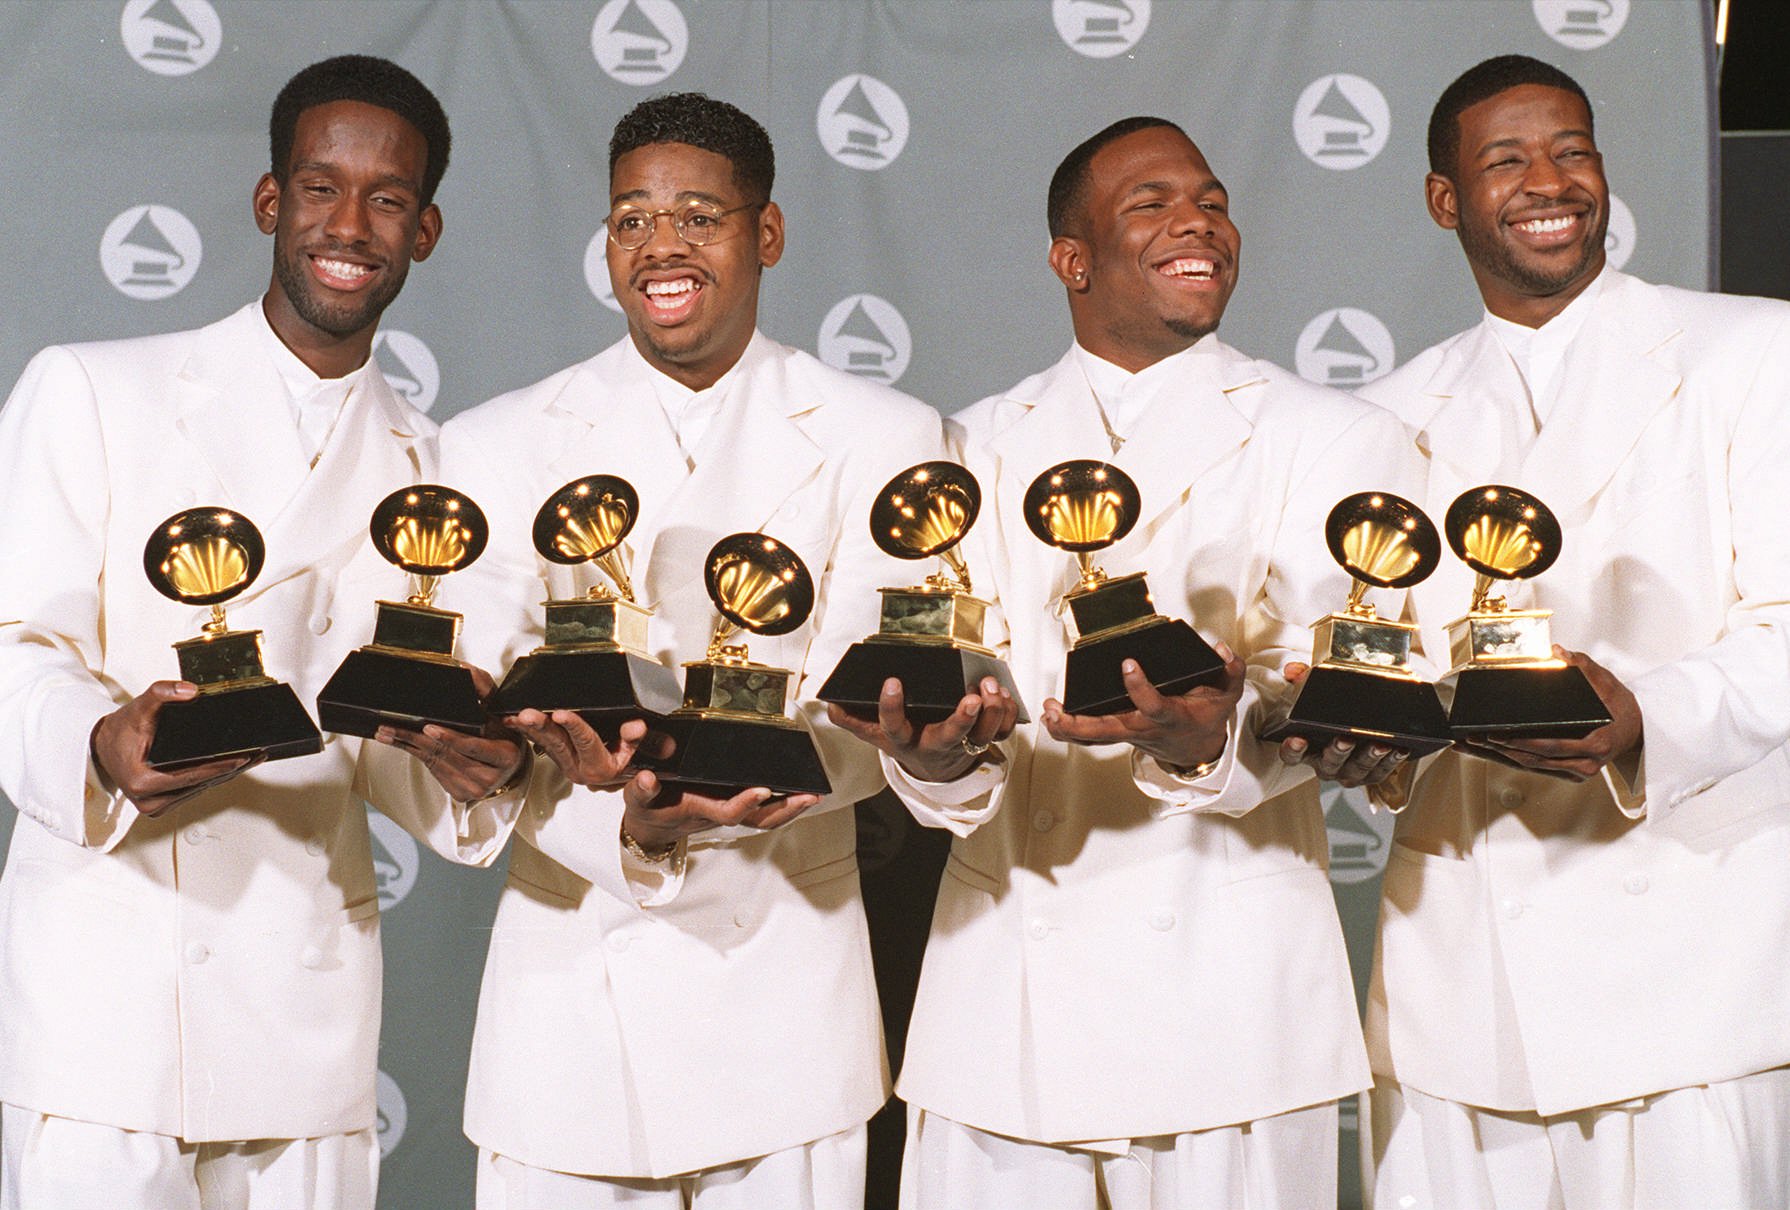 Boyz II Men, shown in this March 1, 1995  photo, display their Grammy awards for Best R&amp;B Album and for Best R&amp;B Duo or Vocal Performance. From left are Shawn Stockman, Nate Morris, Wanya Morris and Michael S. McCary.  Along with Mariah Carey the group was nominated Thursday, Jan. 4, 1996, for a Grammy for  "One Sweet Day" as the record of the year.  Winners will be announced Feb. 27. (AP Photo/Mark J. Terrill)